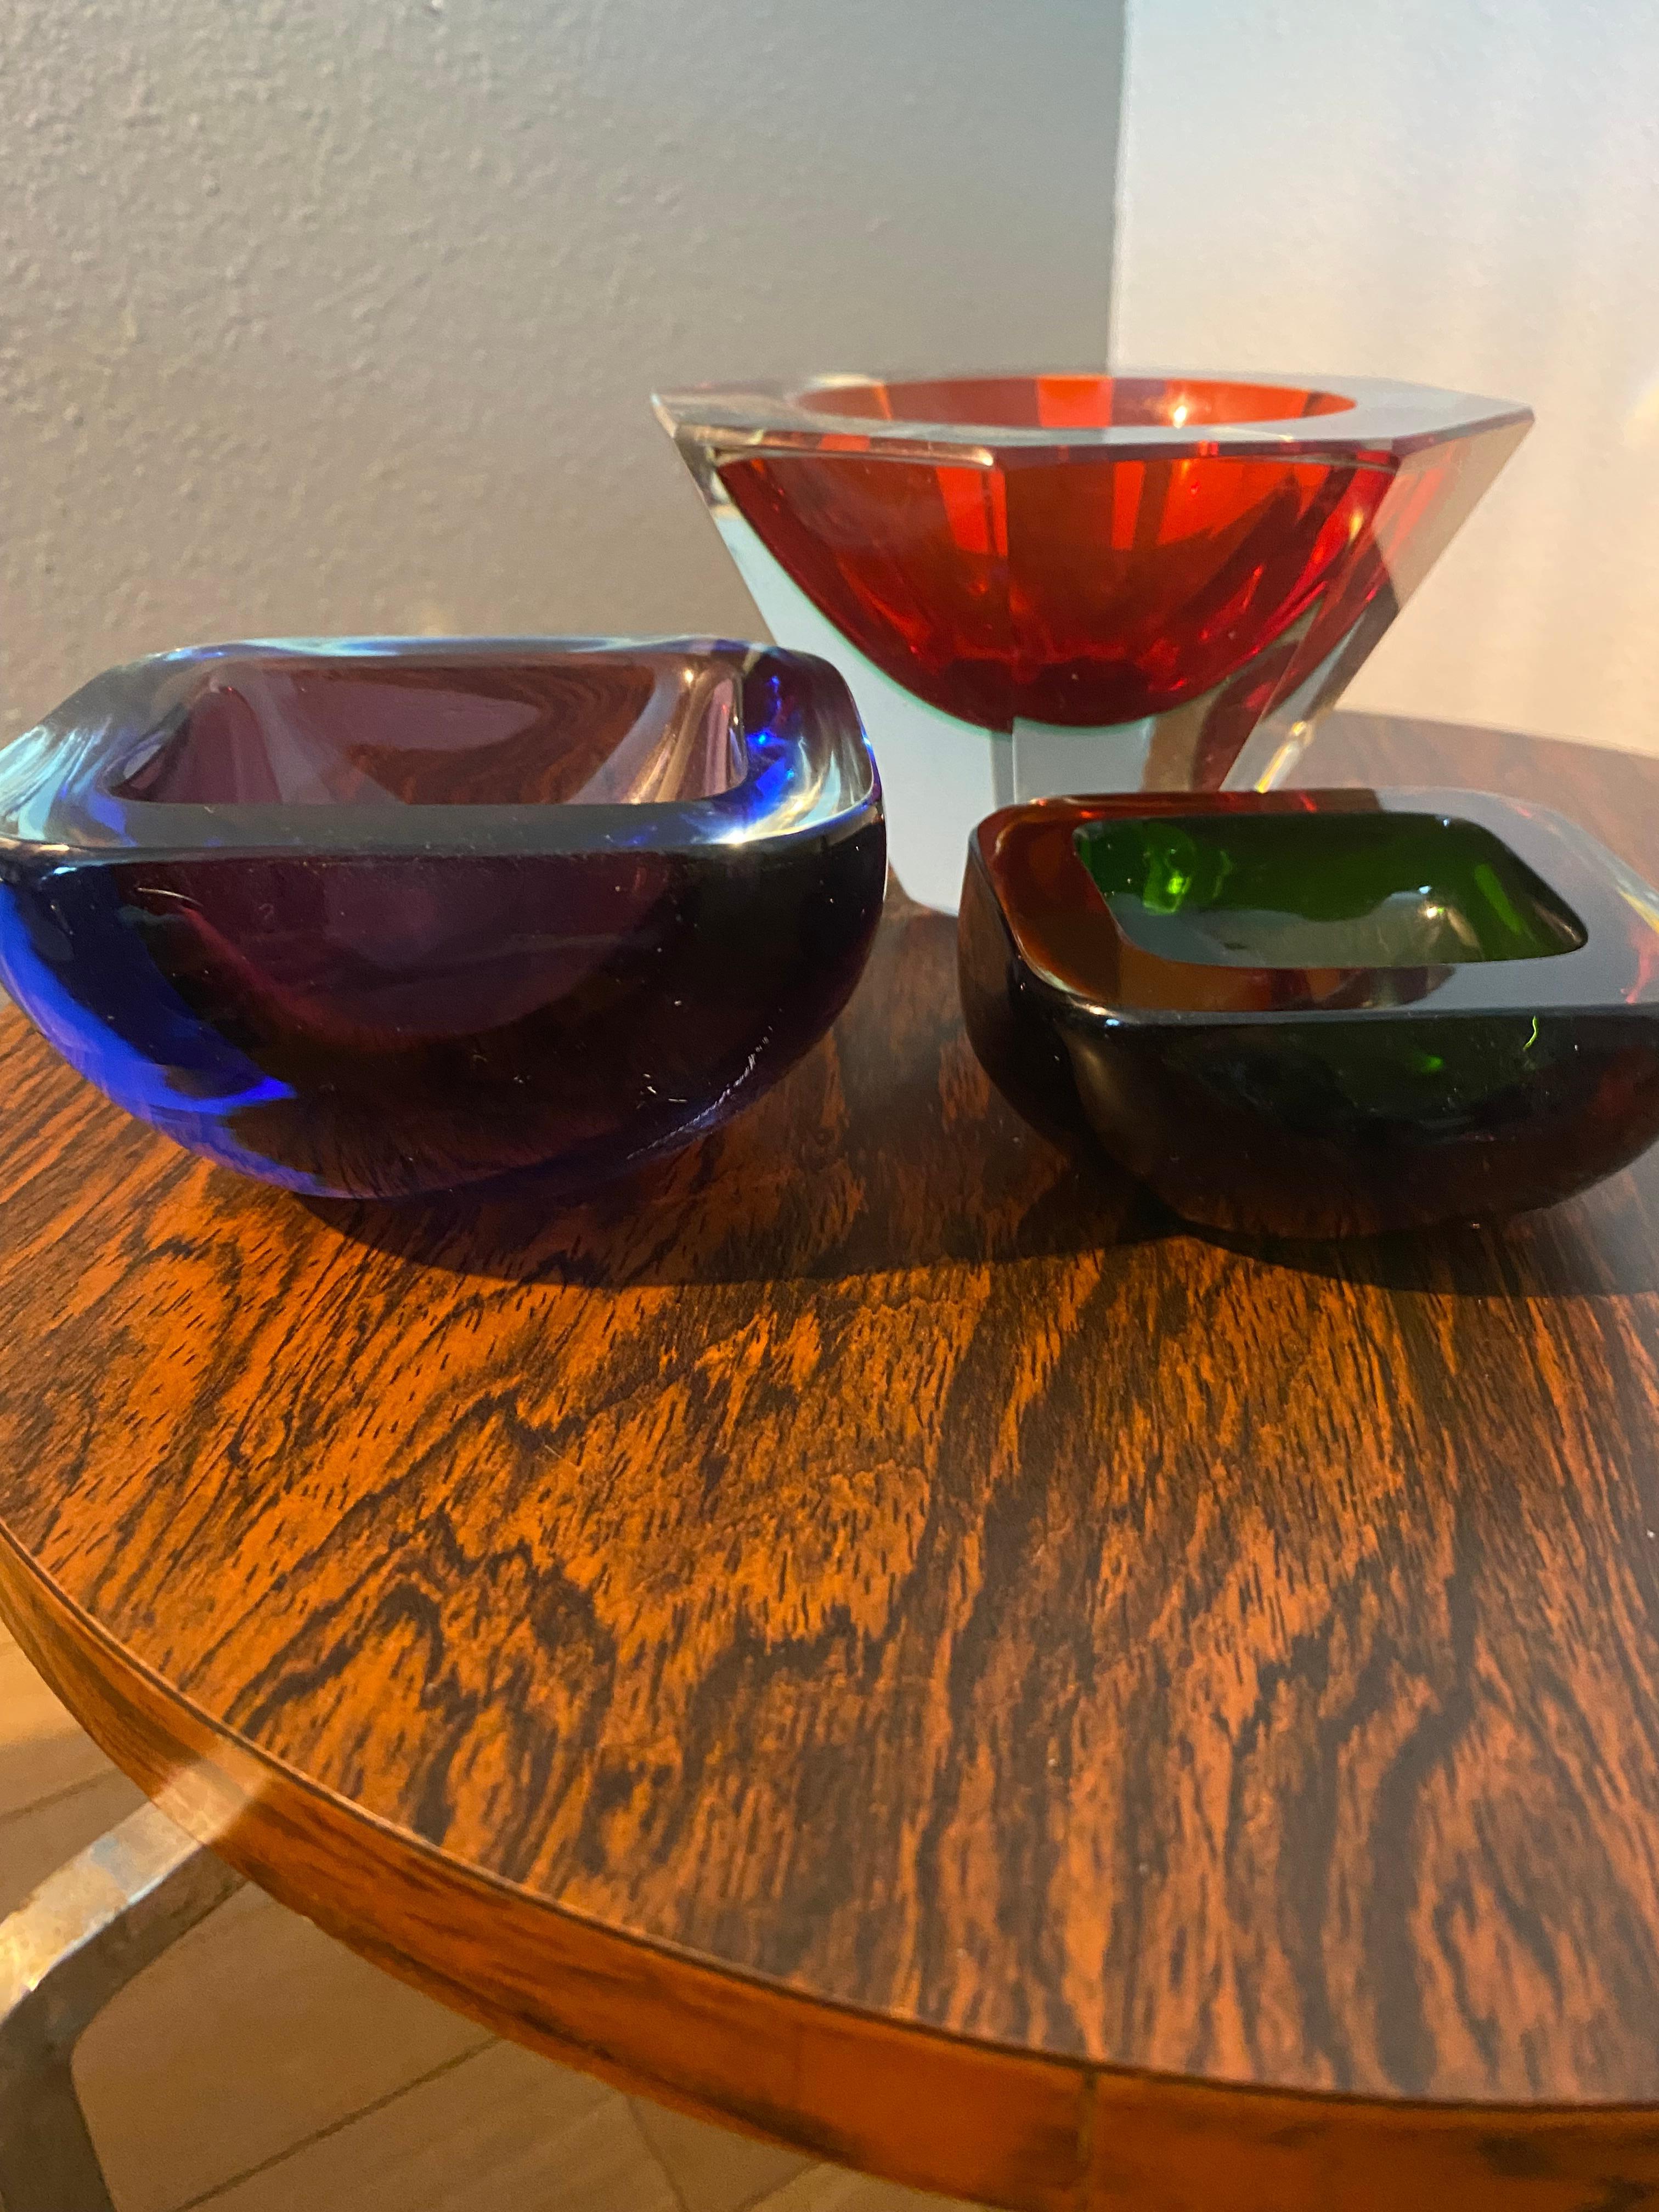 Beautiful midcentury Italian Murano glass bowls. Made using the Sommerso (submerged) glass technique.
Measurements two smaller bowls:
Blue purple bowl: 10x10x5
Brown orange bowl: 8x8x3.5.